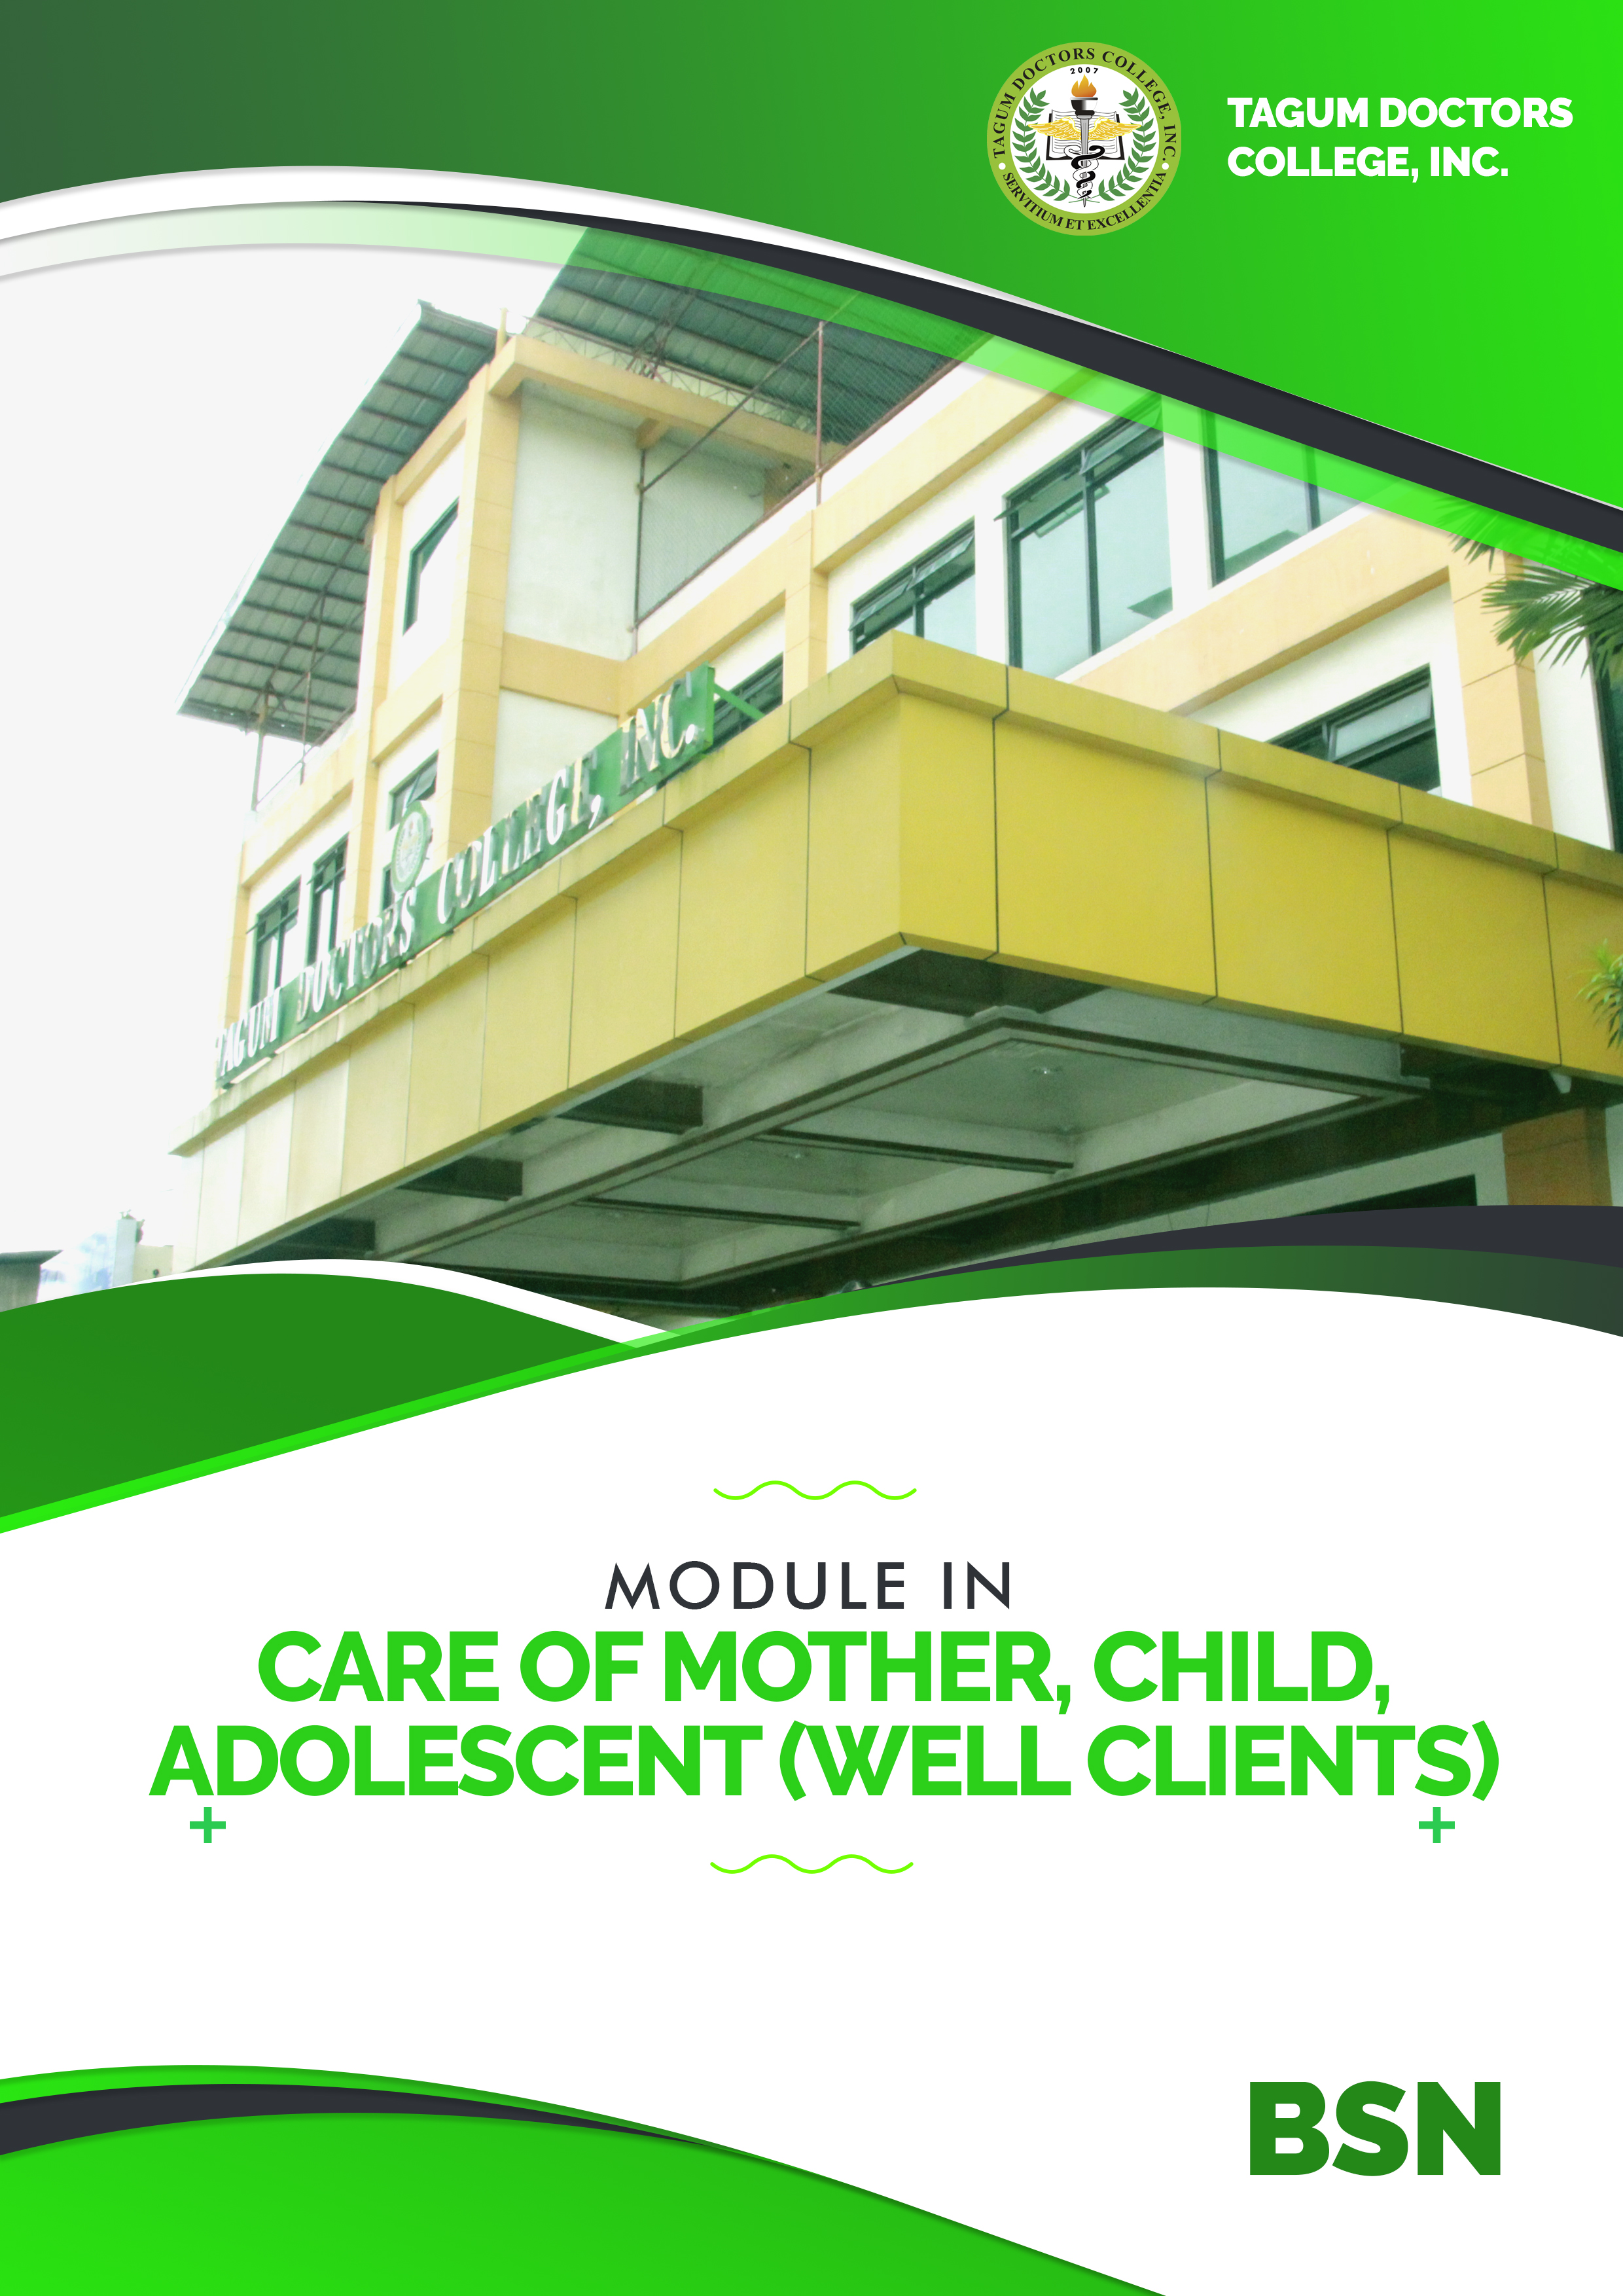 Care of Mother, Child, Adolescent (Well Clients) - BSN 2B